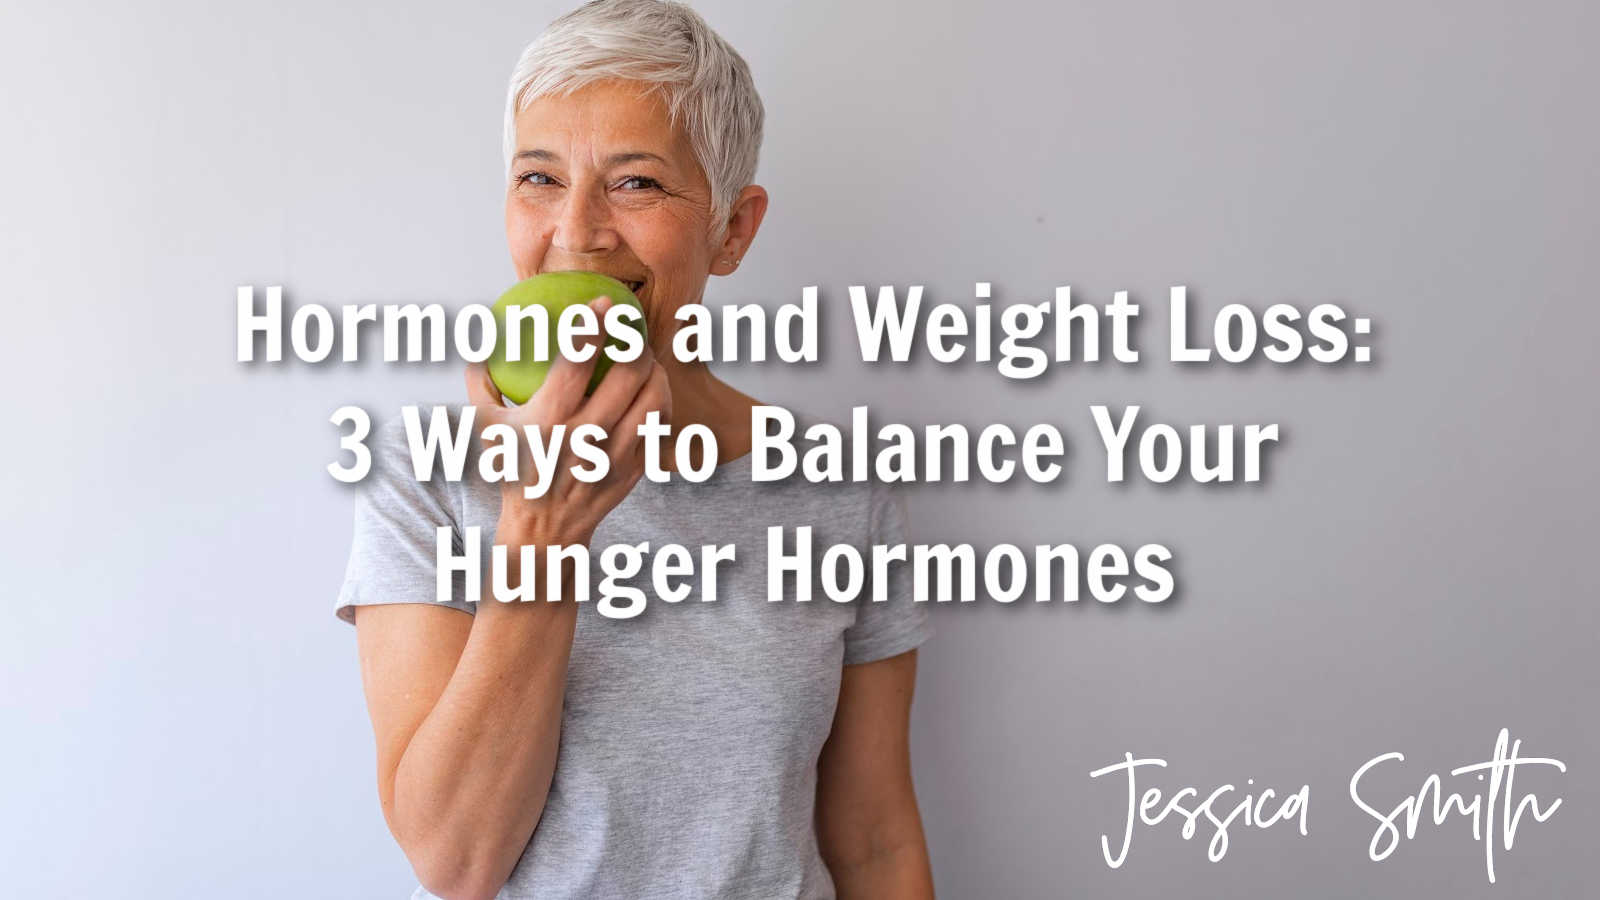 Hormones and Weight Loss: 3 Ways to Balance Your Hunger Hormones